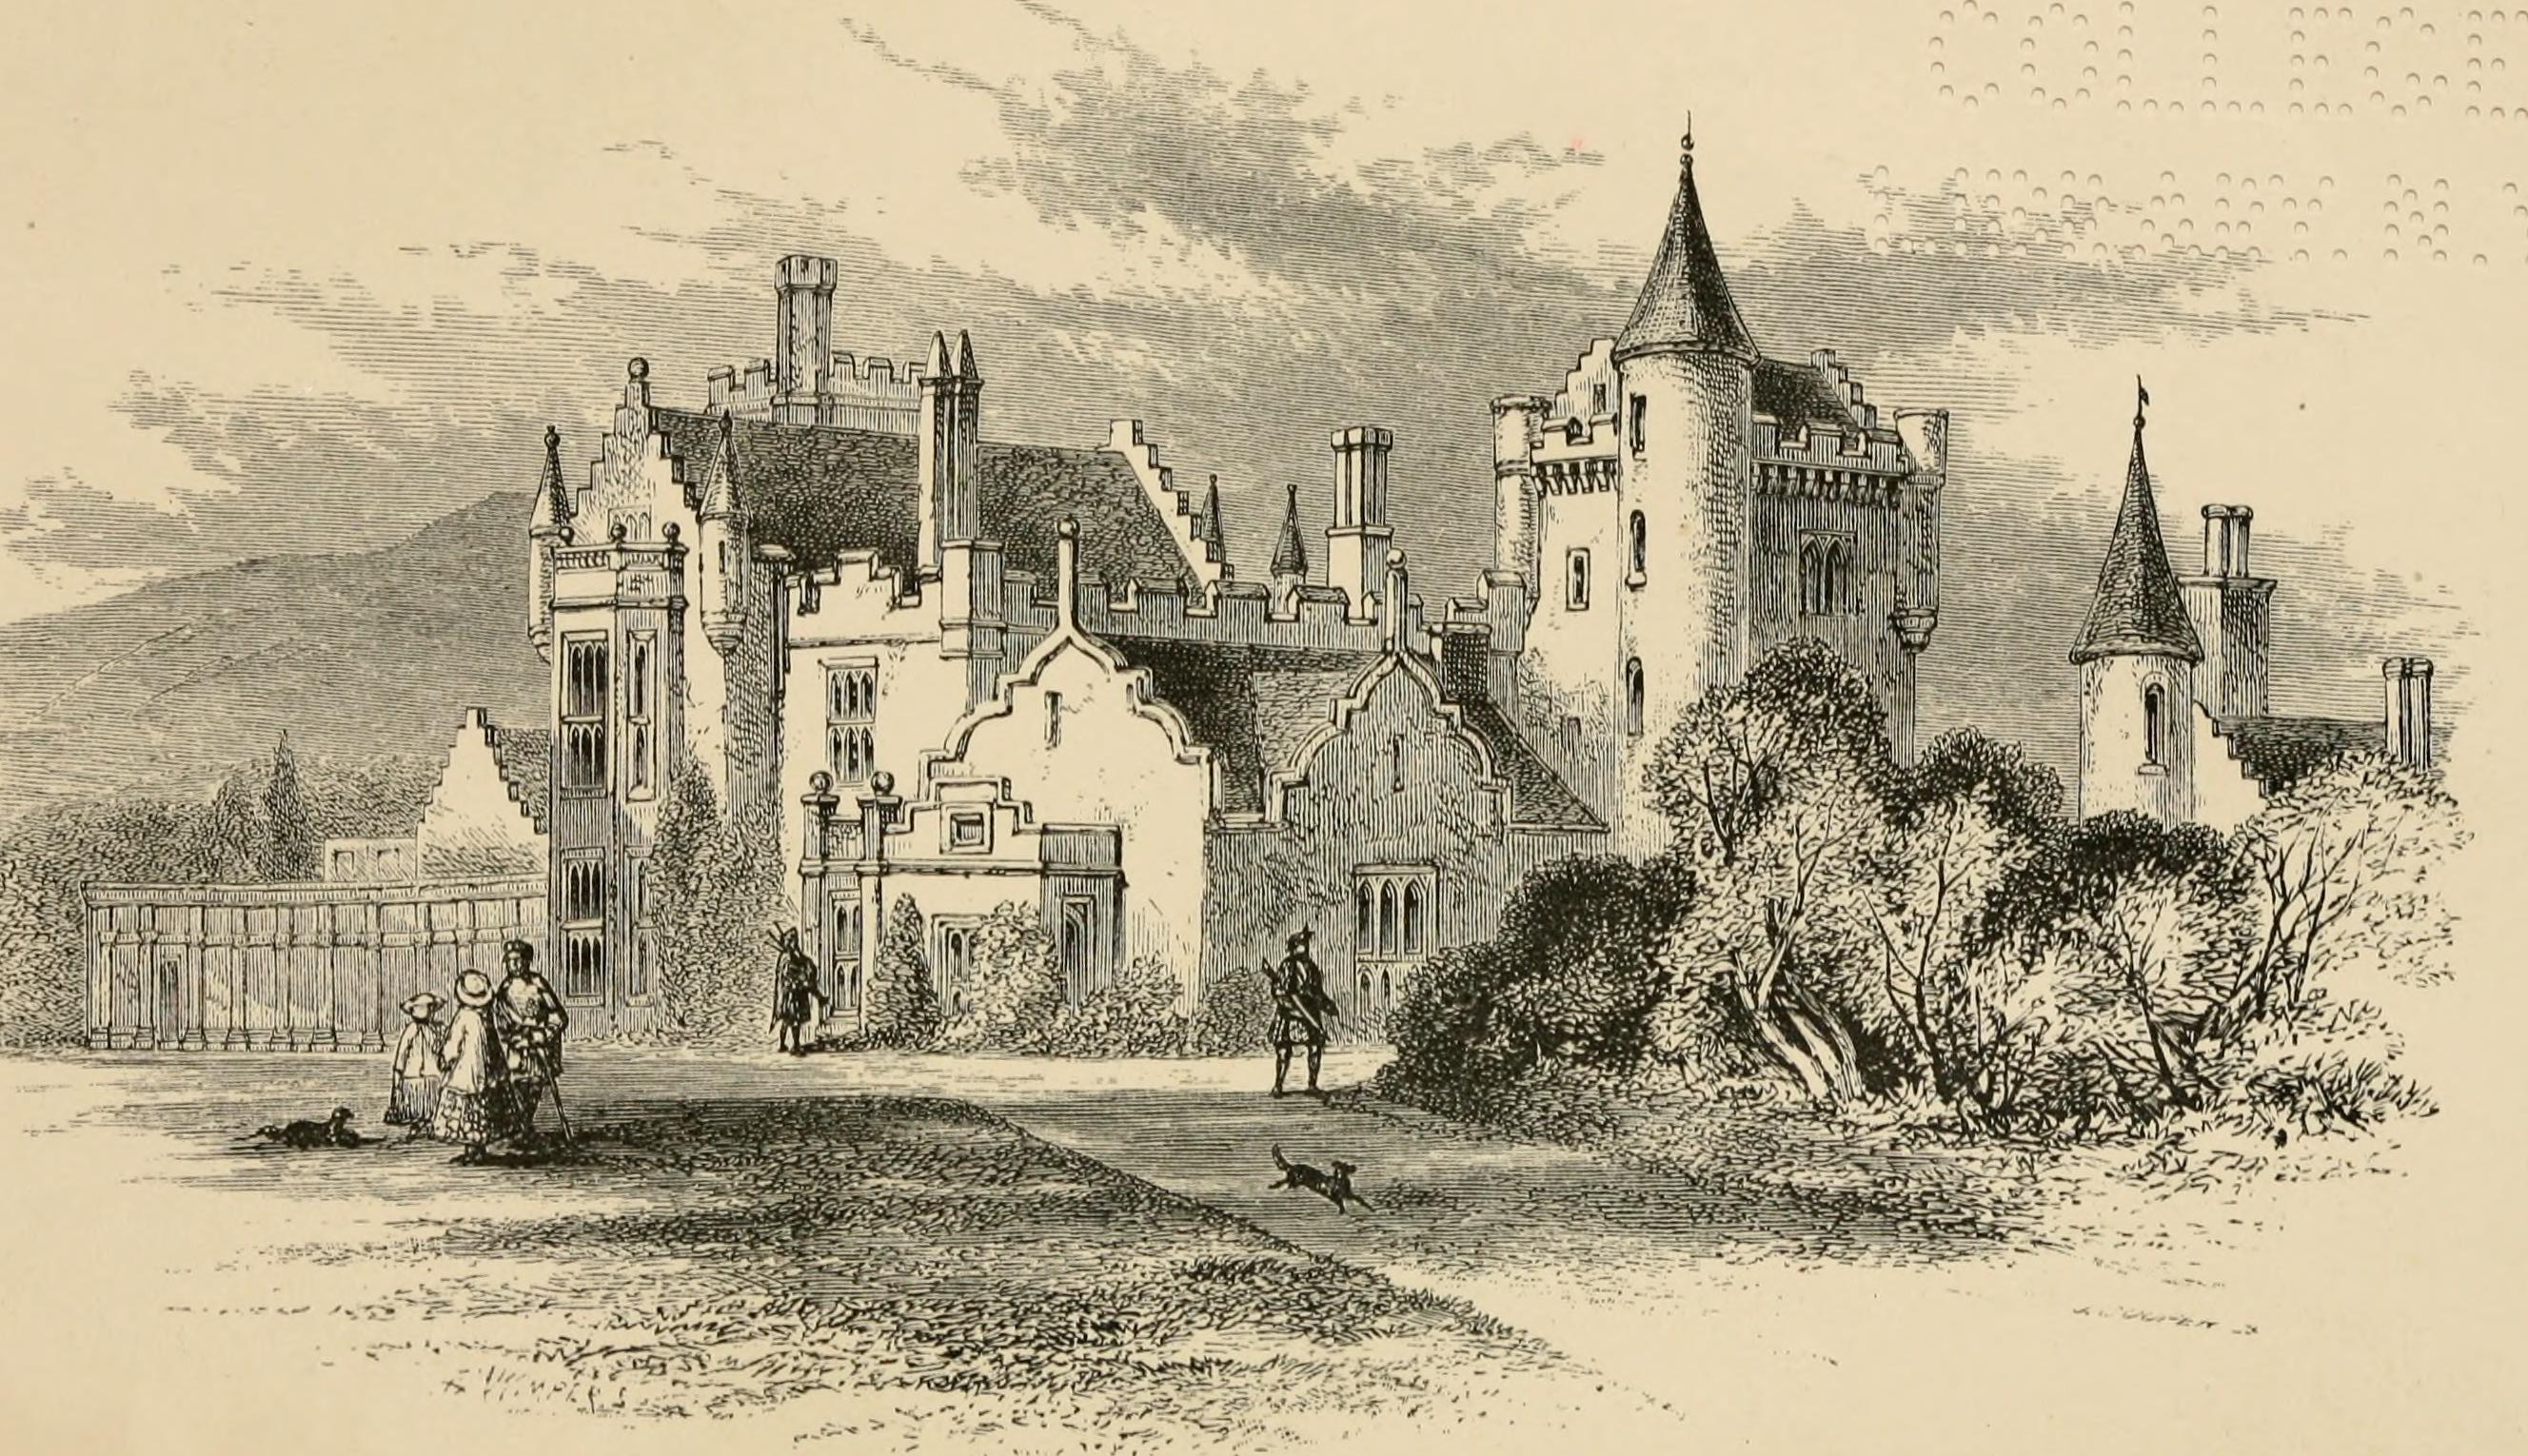 File:Balmoral - The Old Castle.jpg - Wikimedia Commons